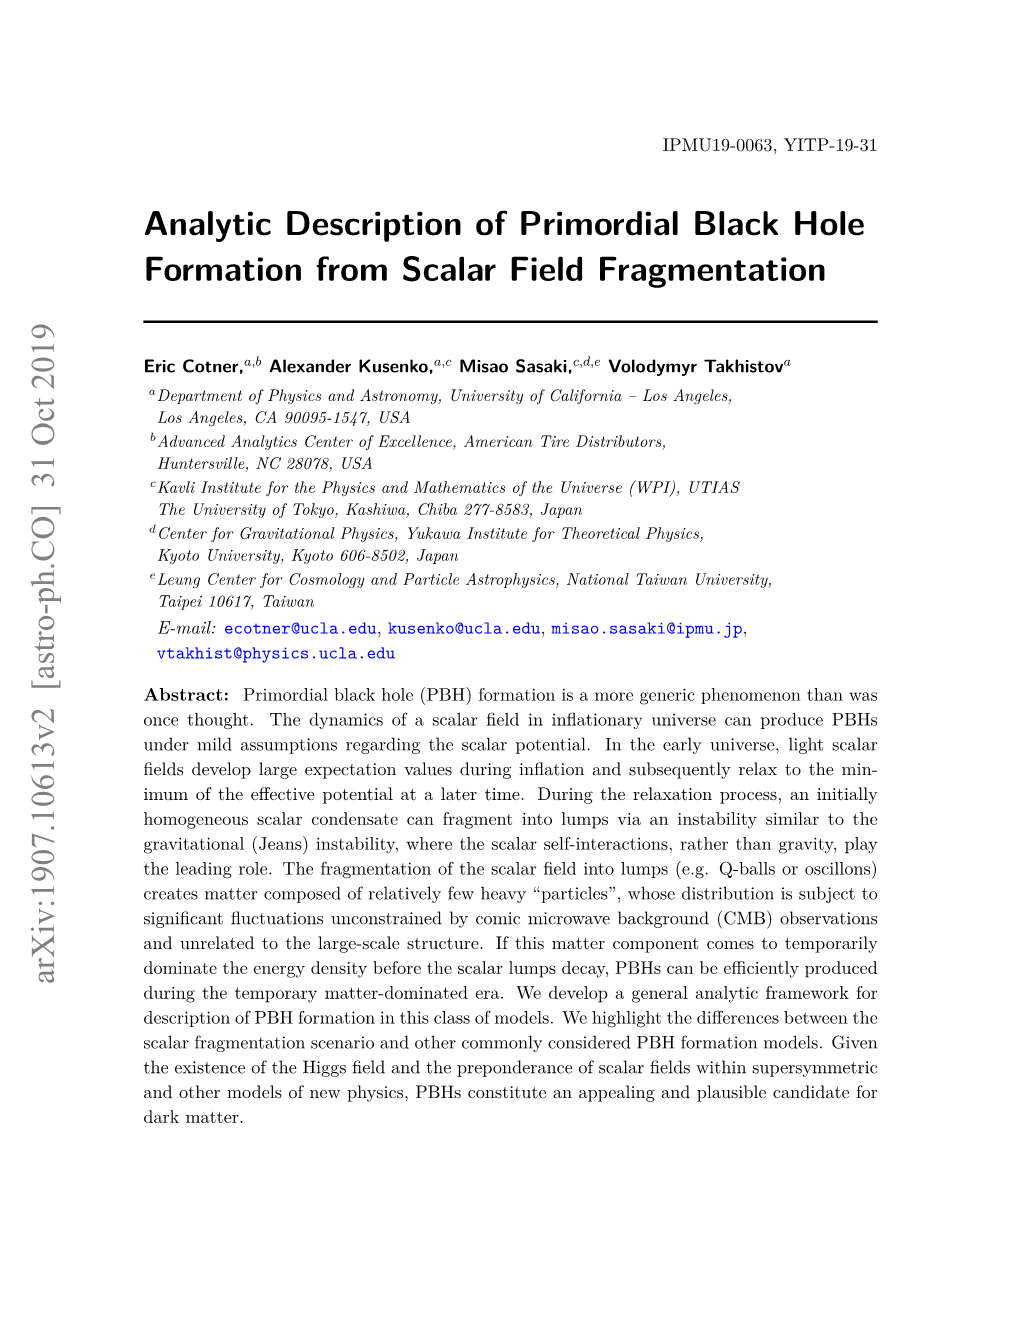 Analytic Description of Primordial Black Hole Formation from Scalar Field Fragmentation